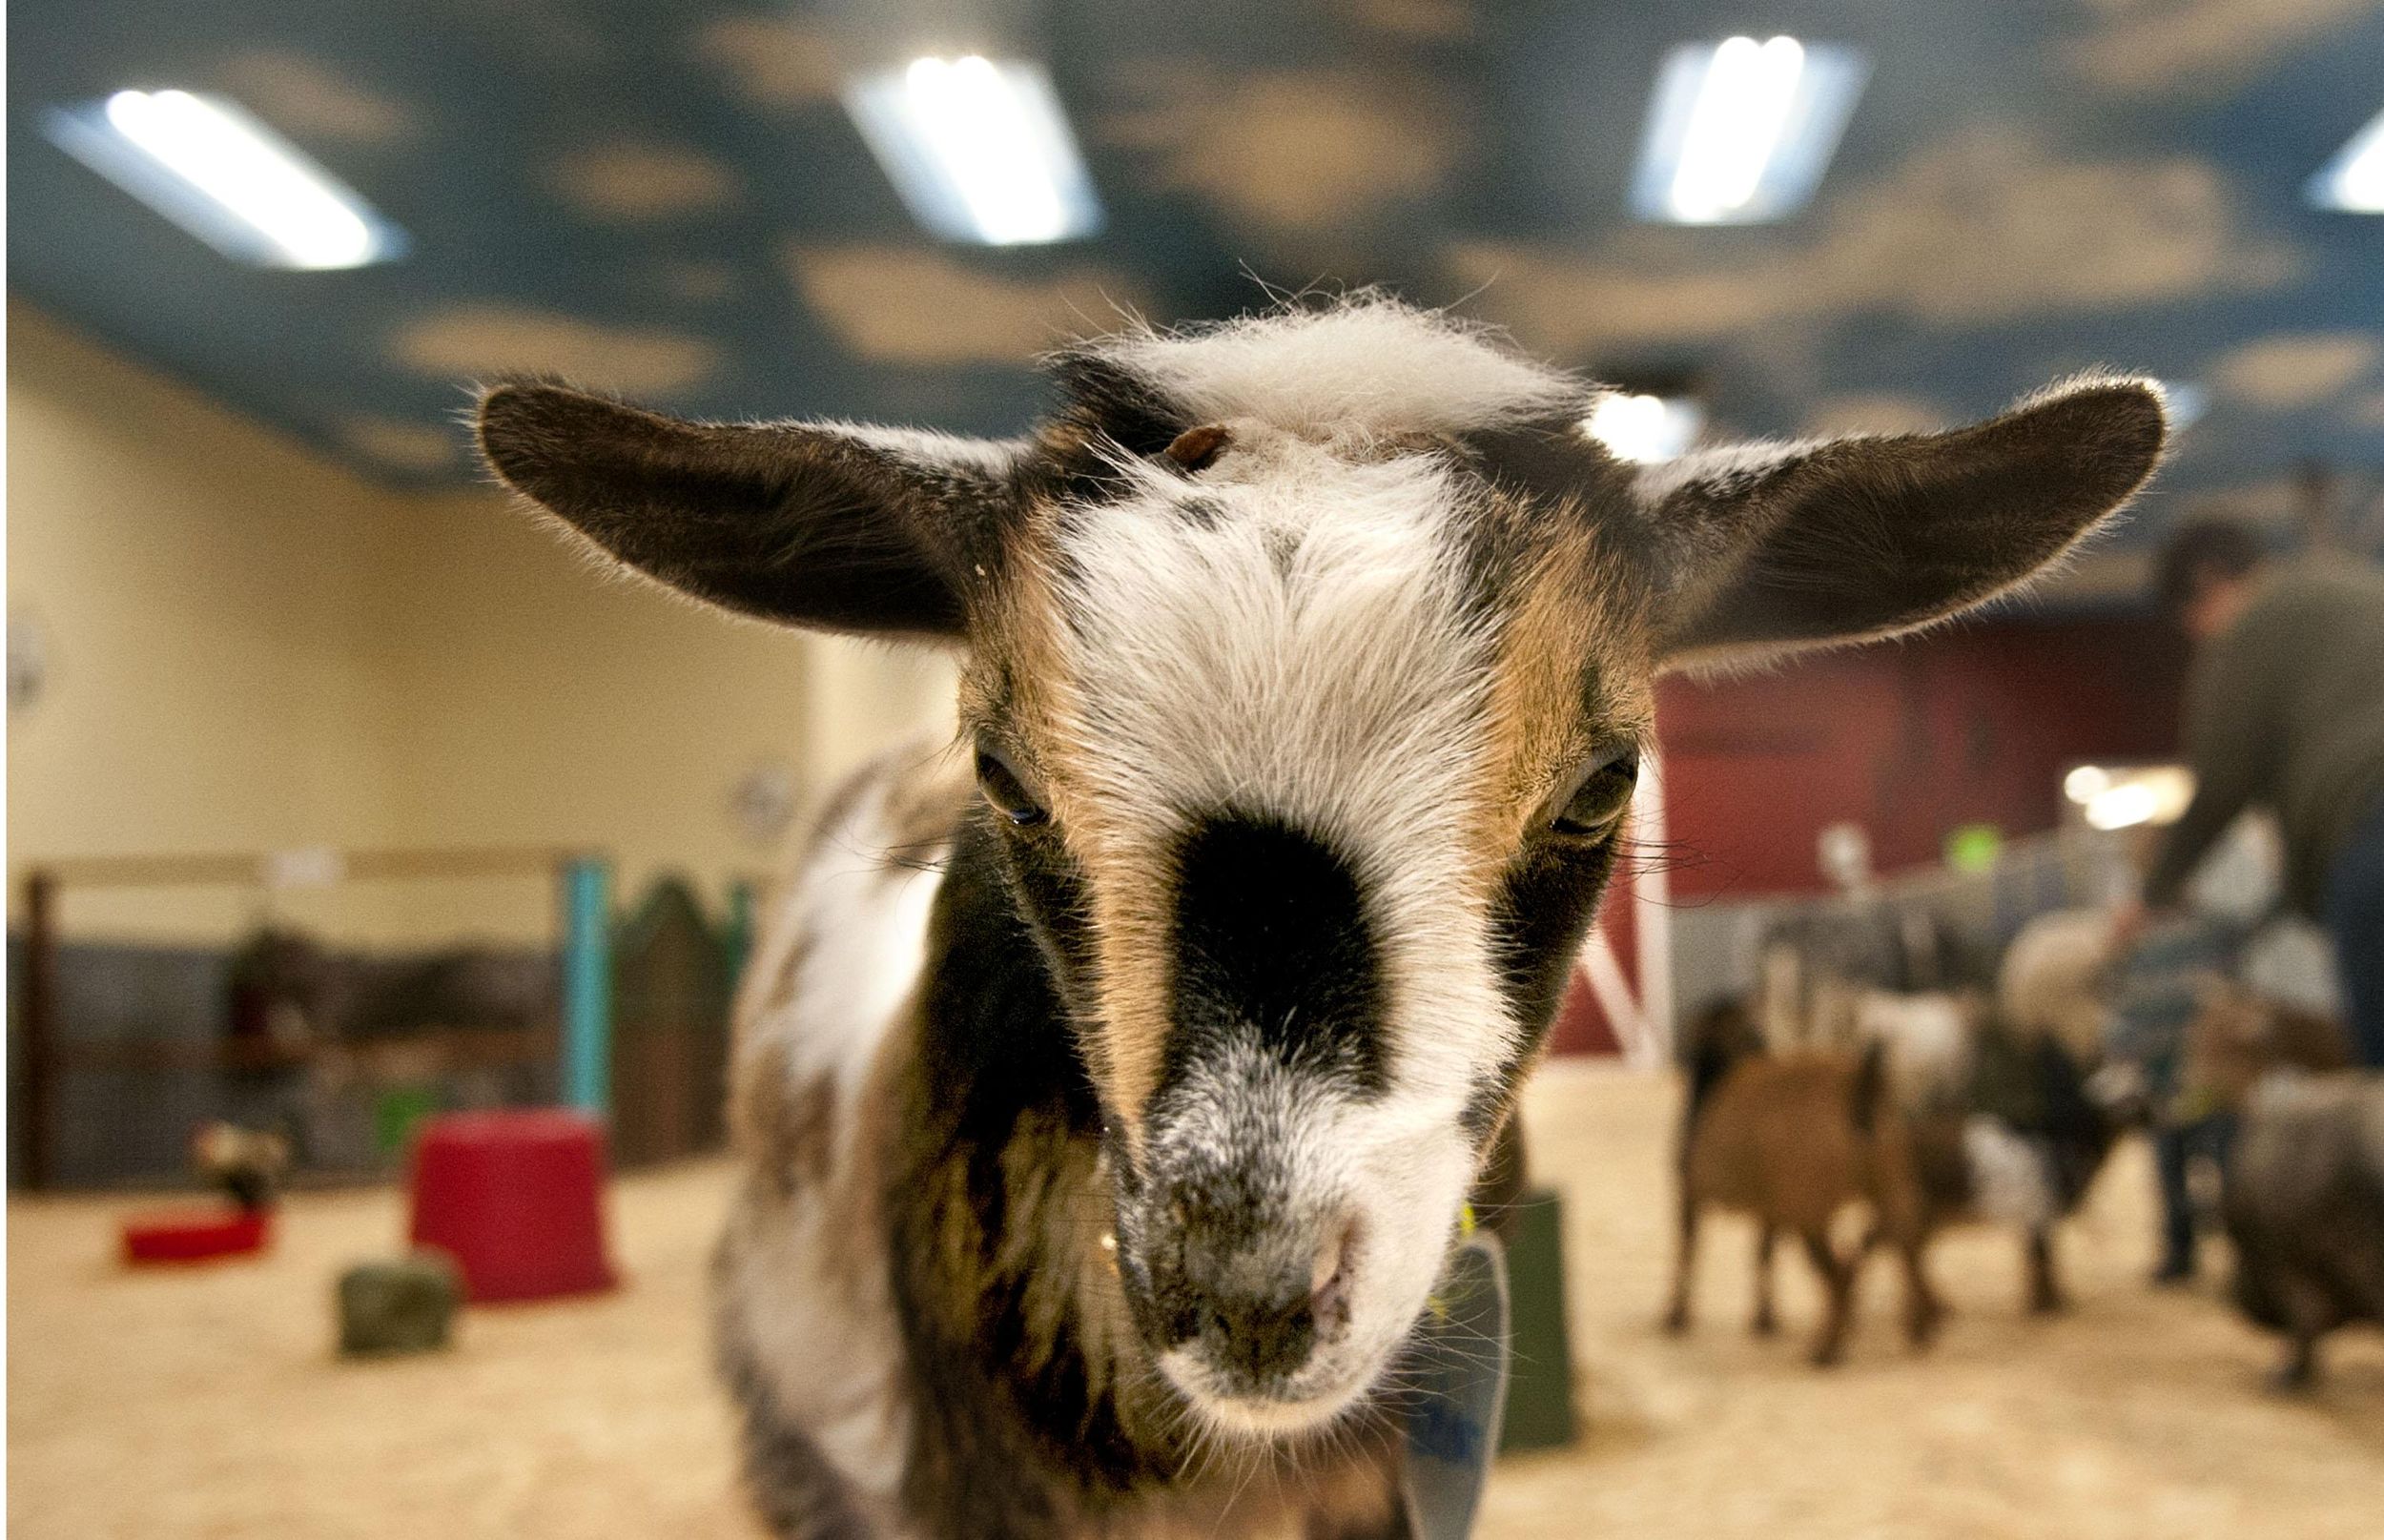 They call it their happy place': Indoor petting zoo draws animal lovers to  Coeur d'Alene | The Spokesman-Review